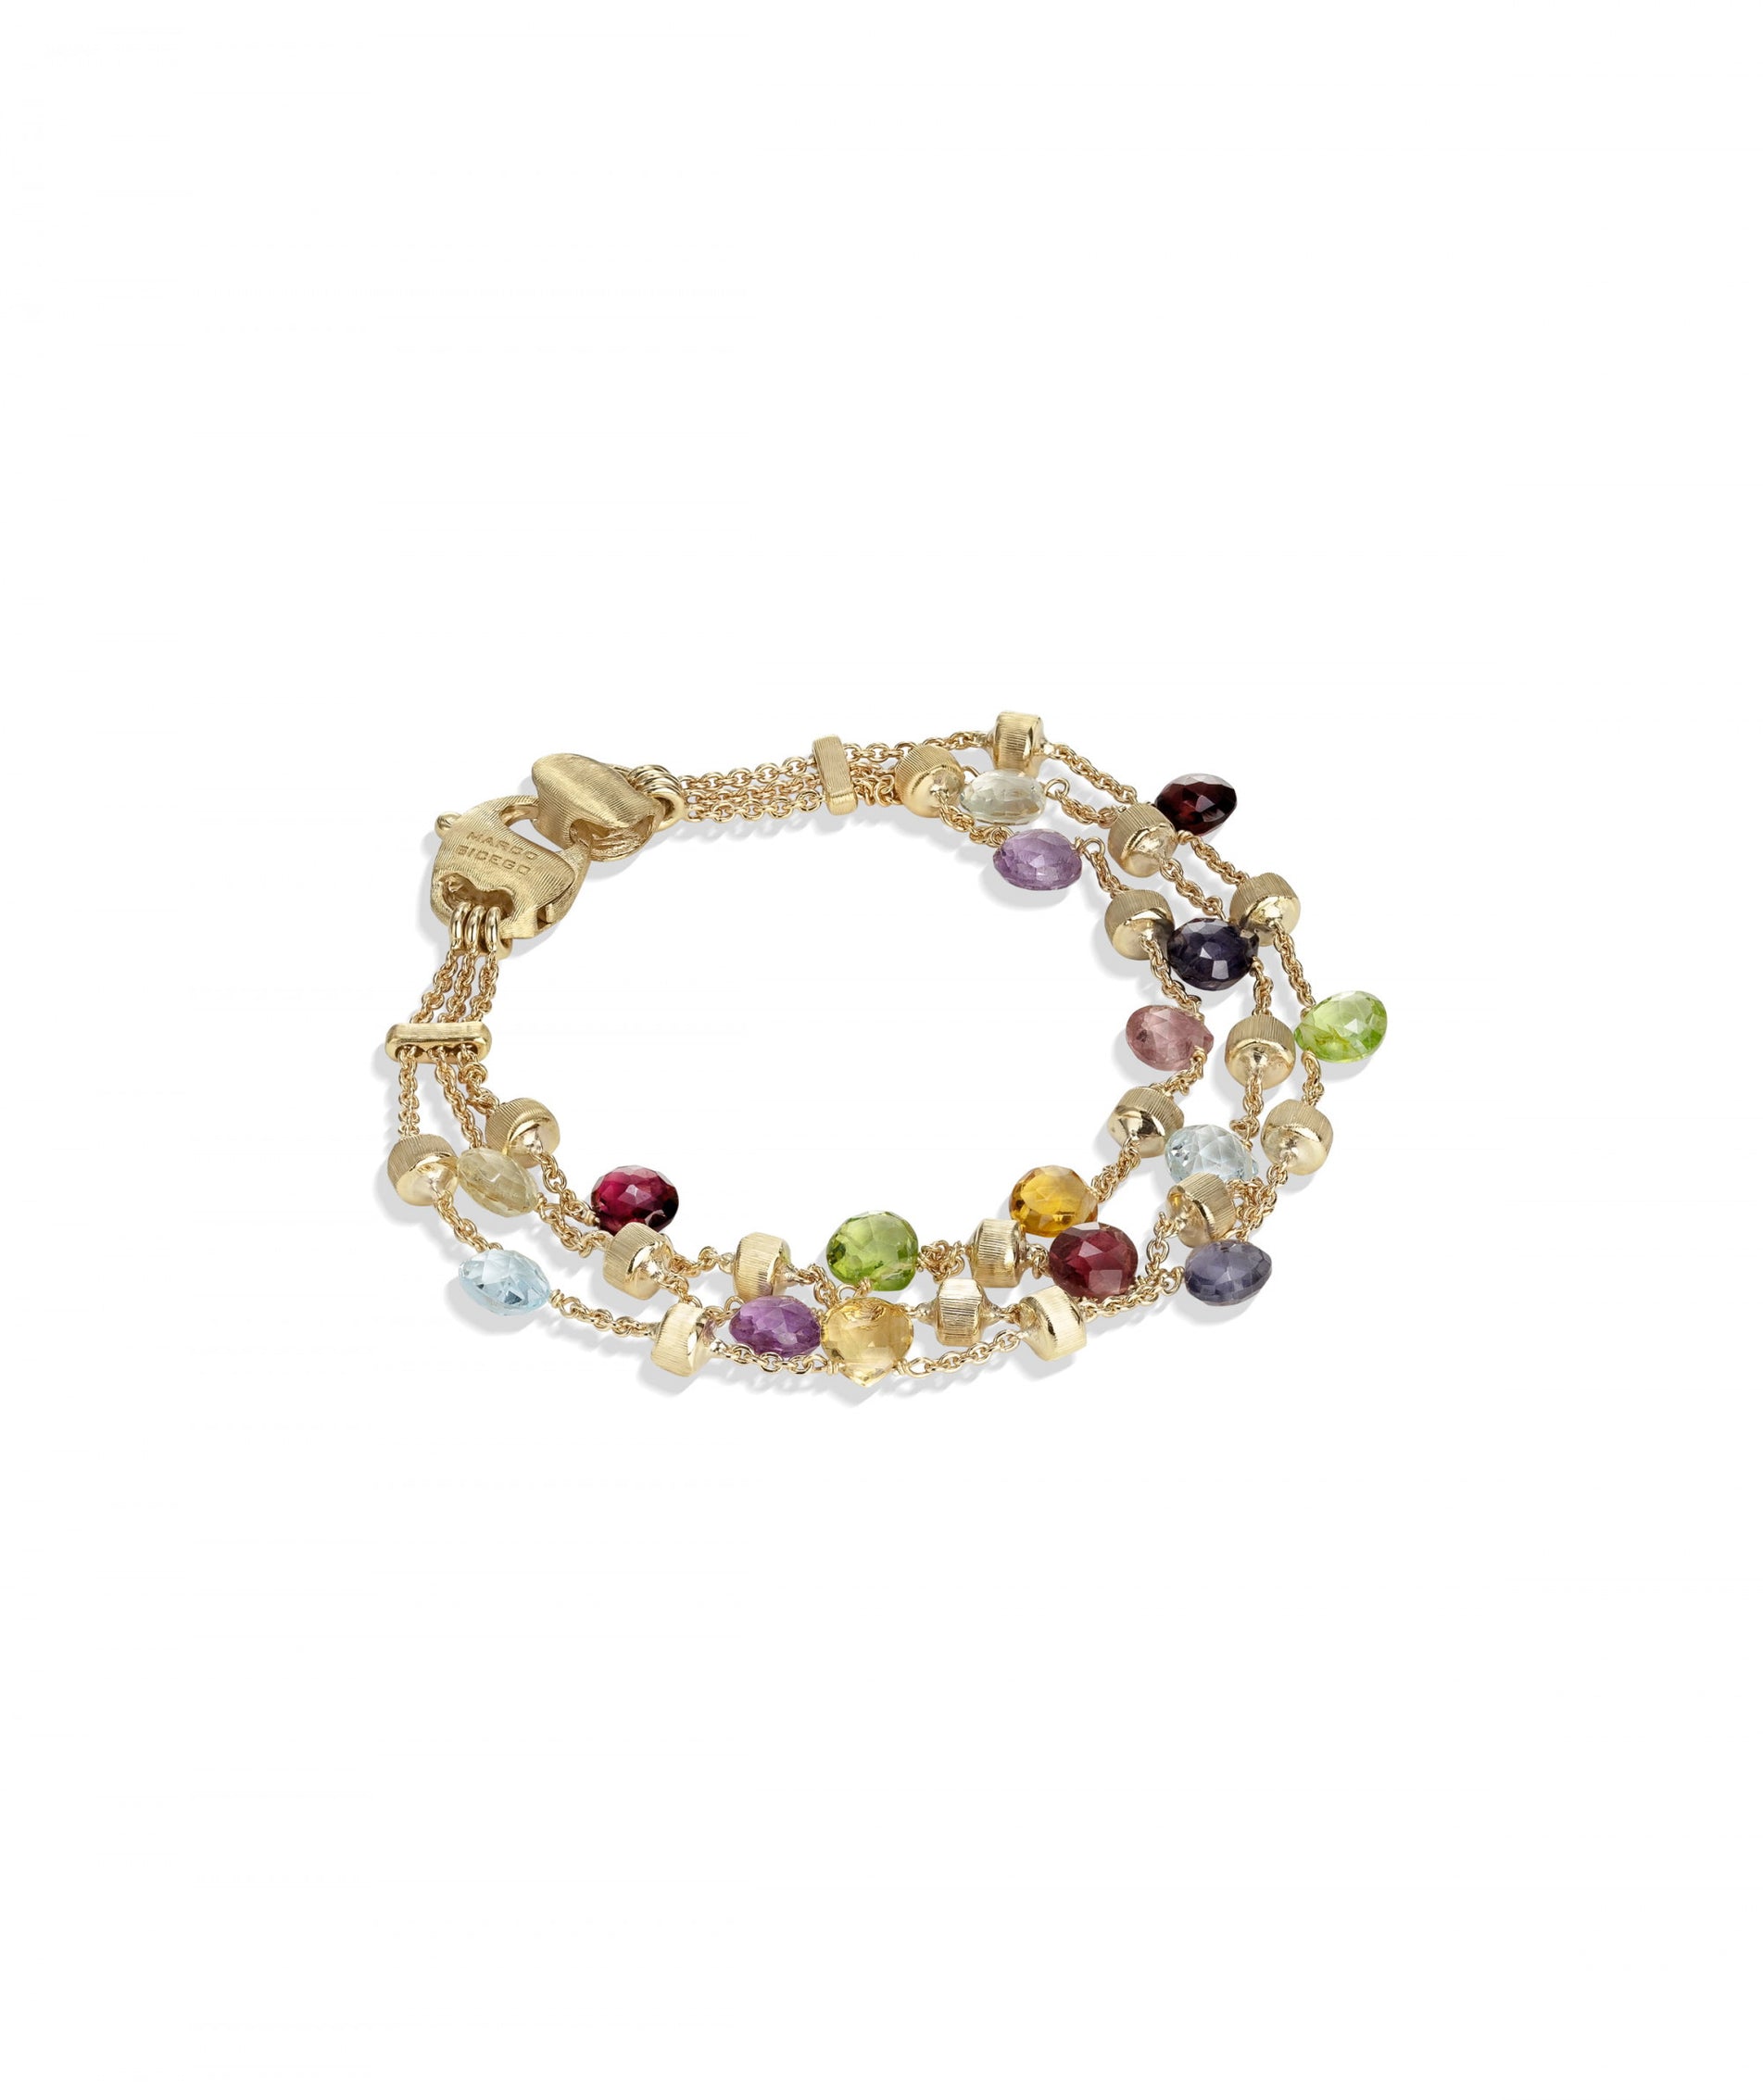 Paradise Bracelet in 18k Yellow Gold with Mixed Gemstones Three Strand - Orsini Jewellers NZ